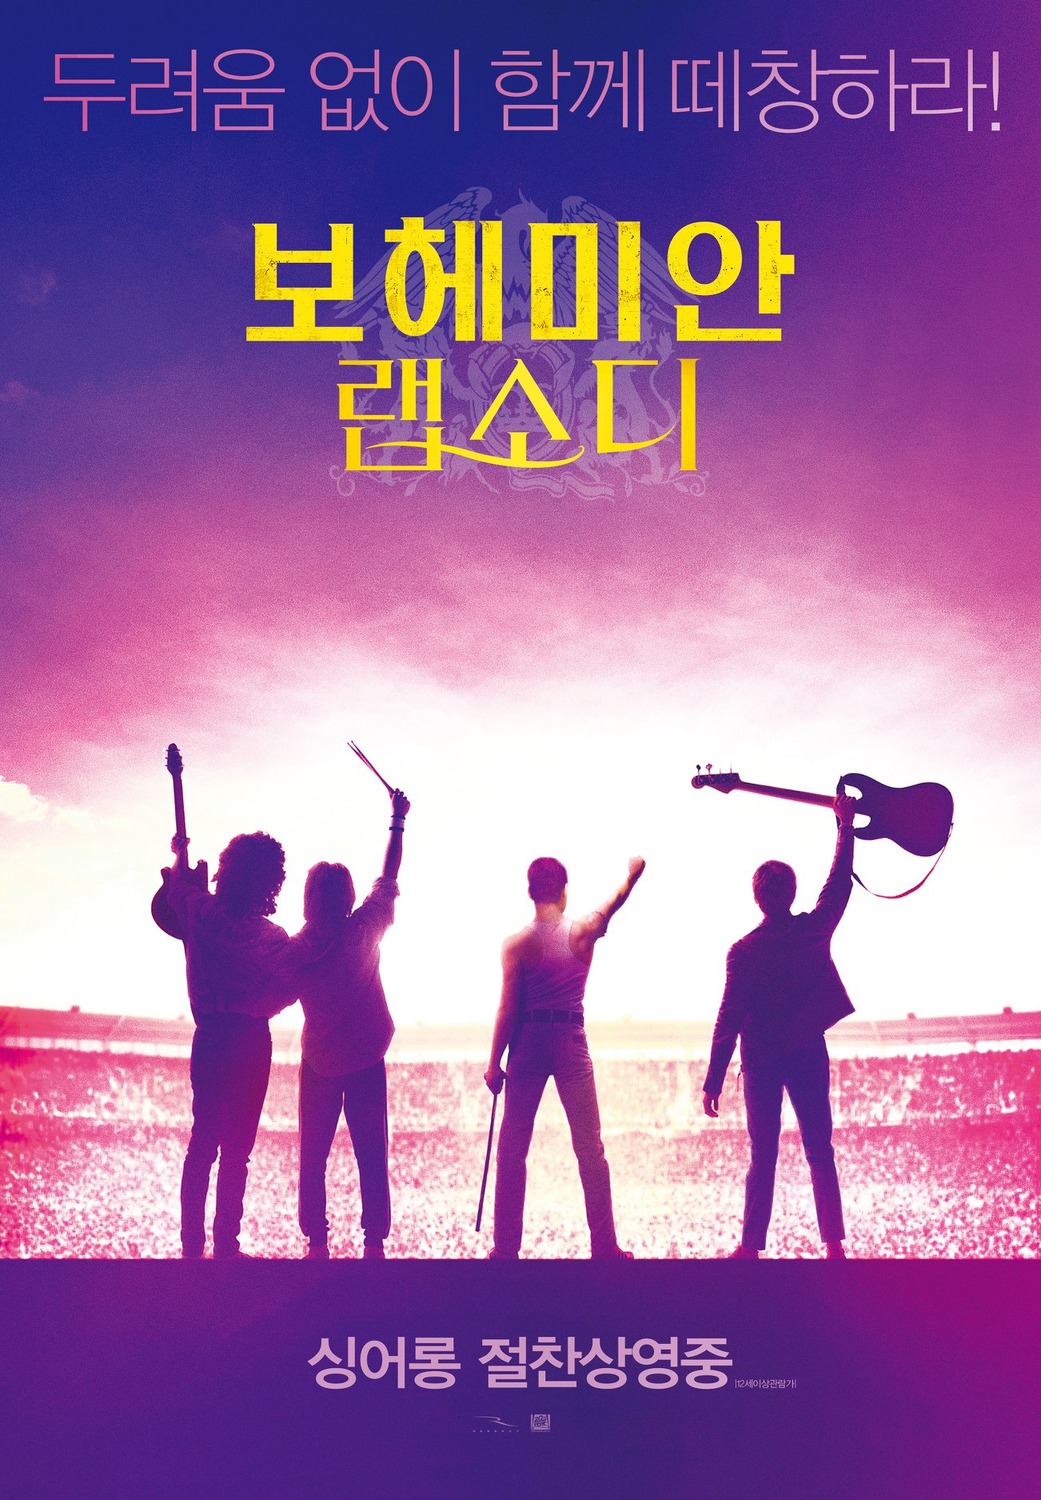 Extra Large Movie Poster Image for Bohemian Rhapsody (#11 of 12)